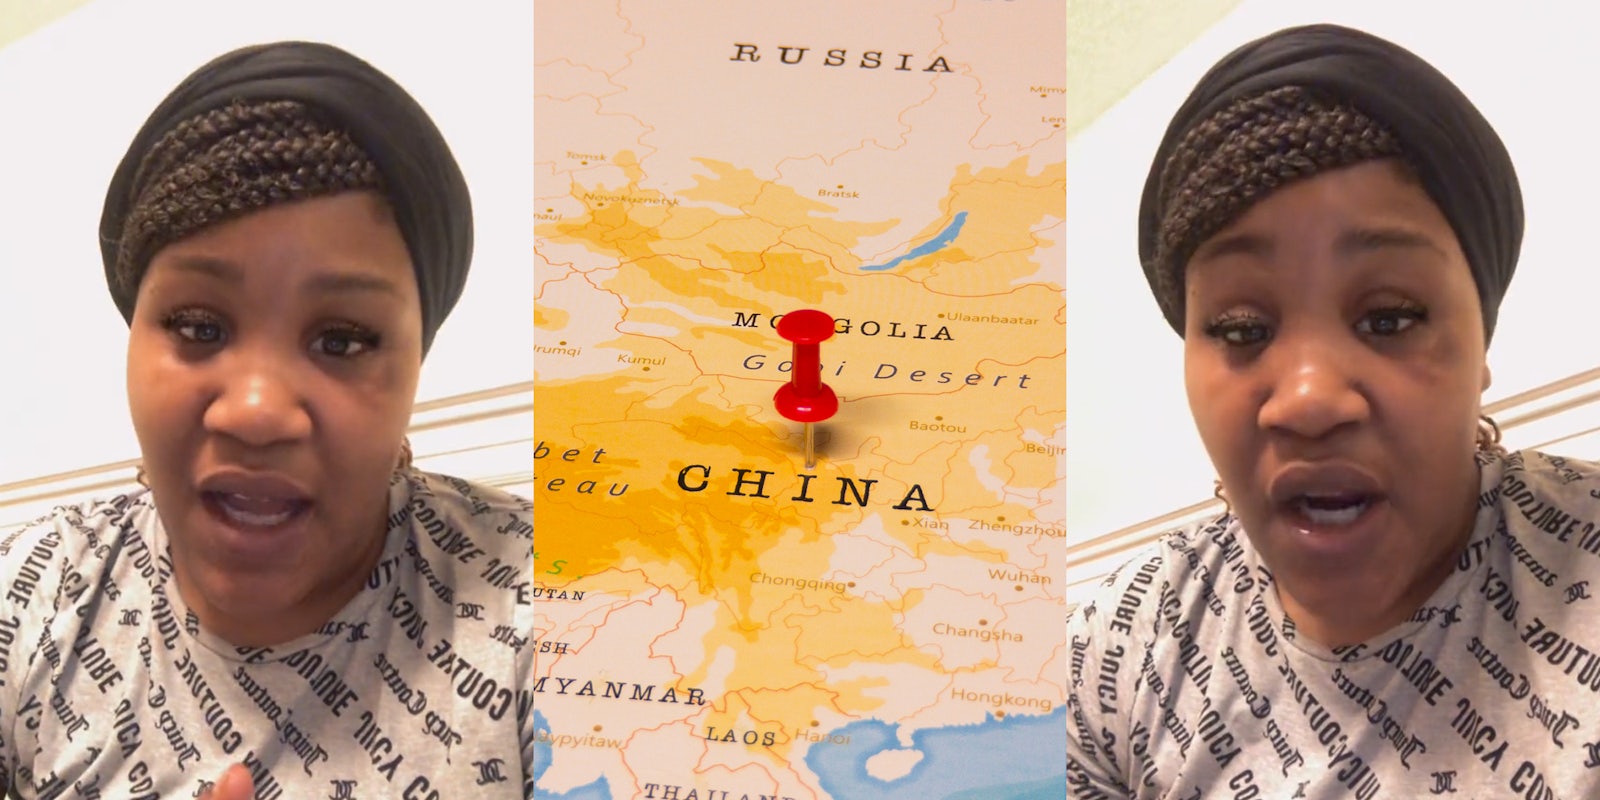 woman speaking in front of light background (l) China on map with red pin in it (c) woman speaking in front of light background (r)